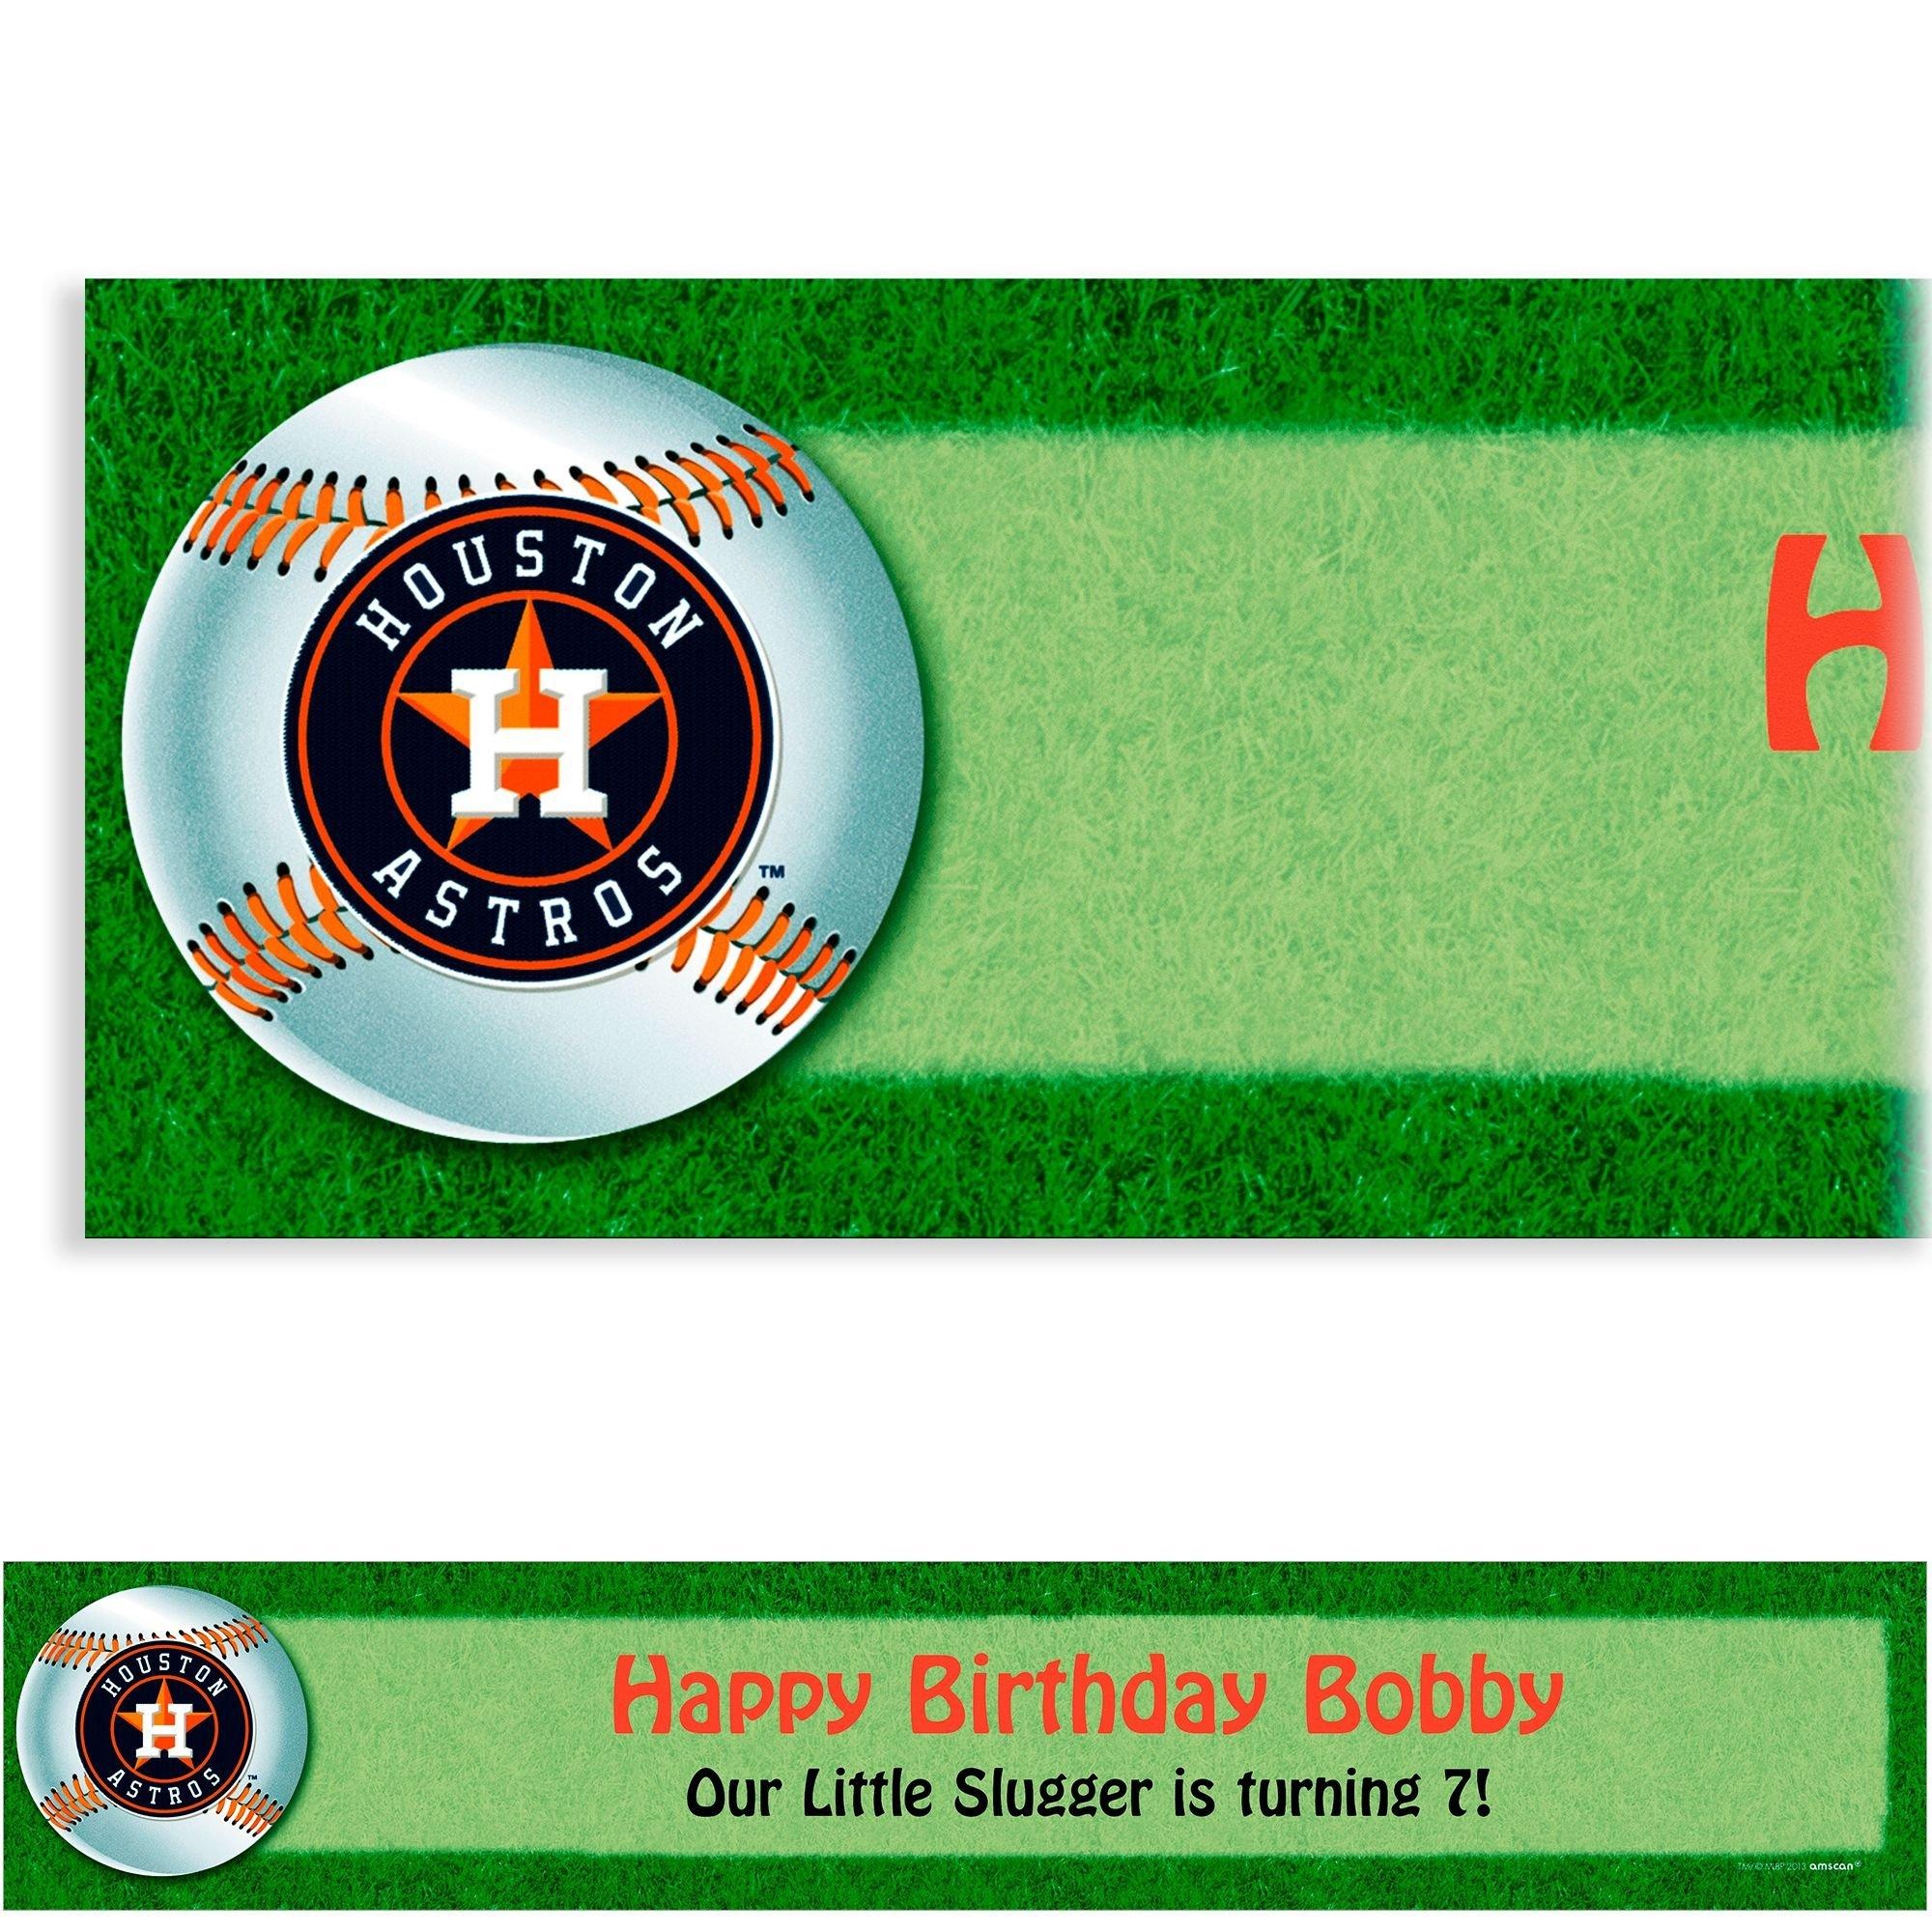 Astros Baseball Birthday Party Decorations ,astros Baseball Birthday Party Favor with Banner, Ballons,Cake Topper, Cupcake Toppers for Boys Girls